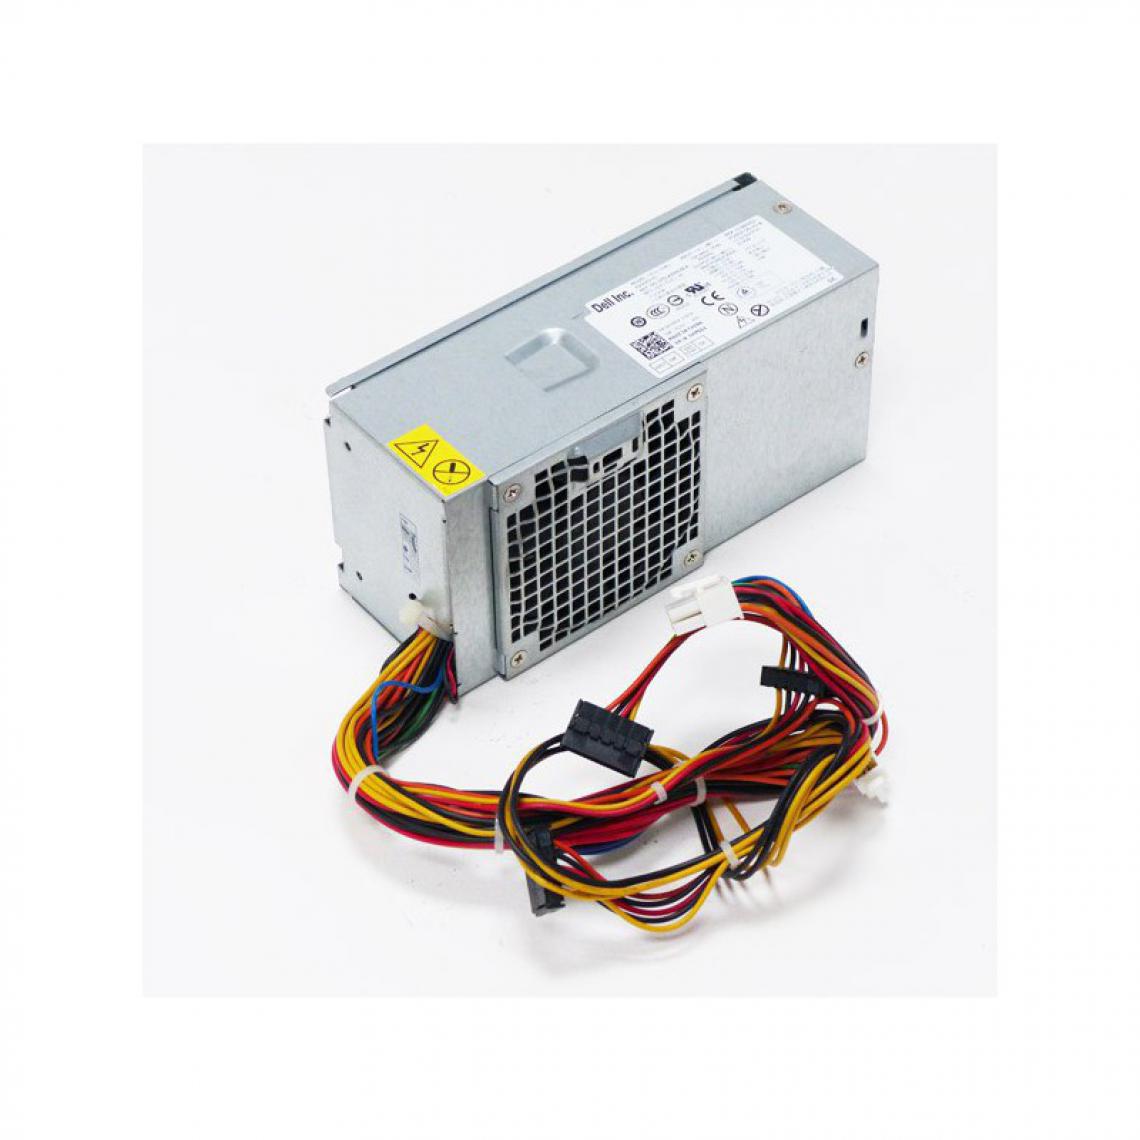 Dell - Alimentation DELL Optiplex 990 DT L250AD-00 PS-5251-01D FY9H3 250W Power Supply - Alimentation modulaire